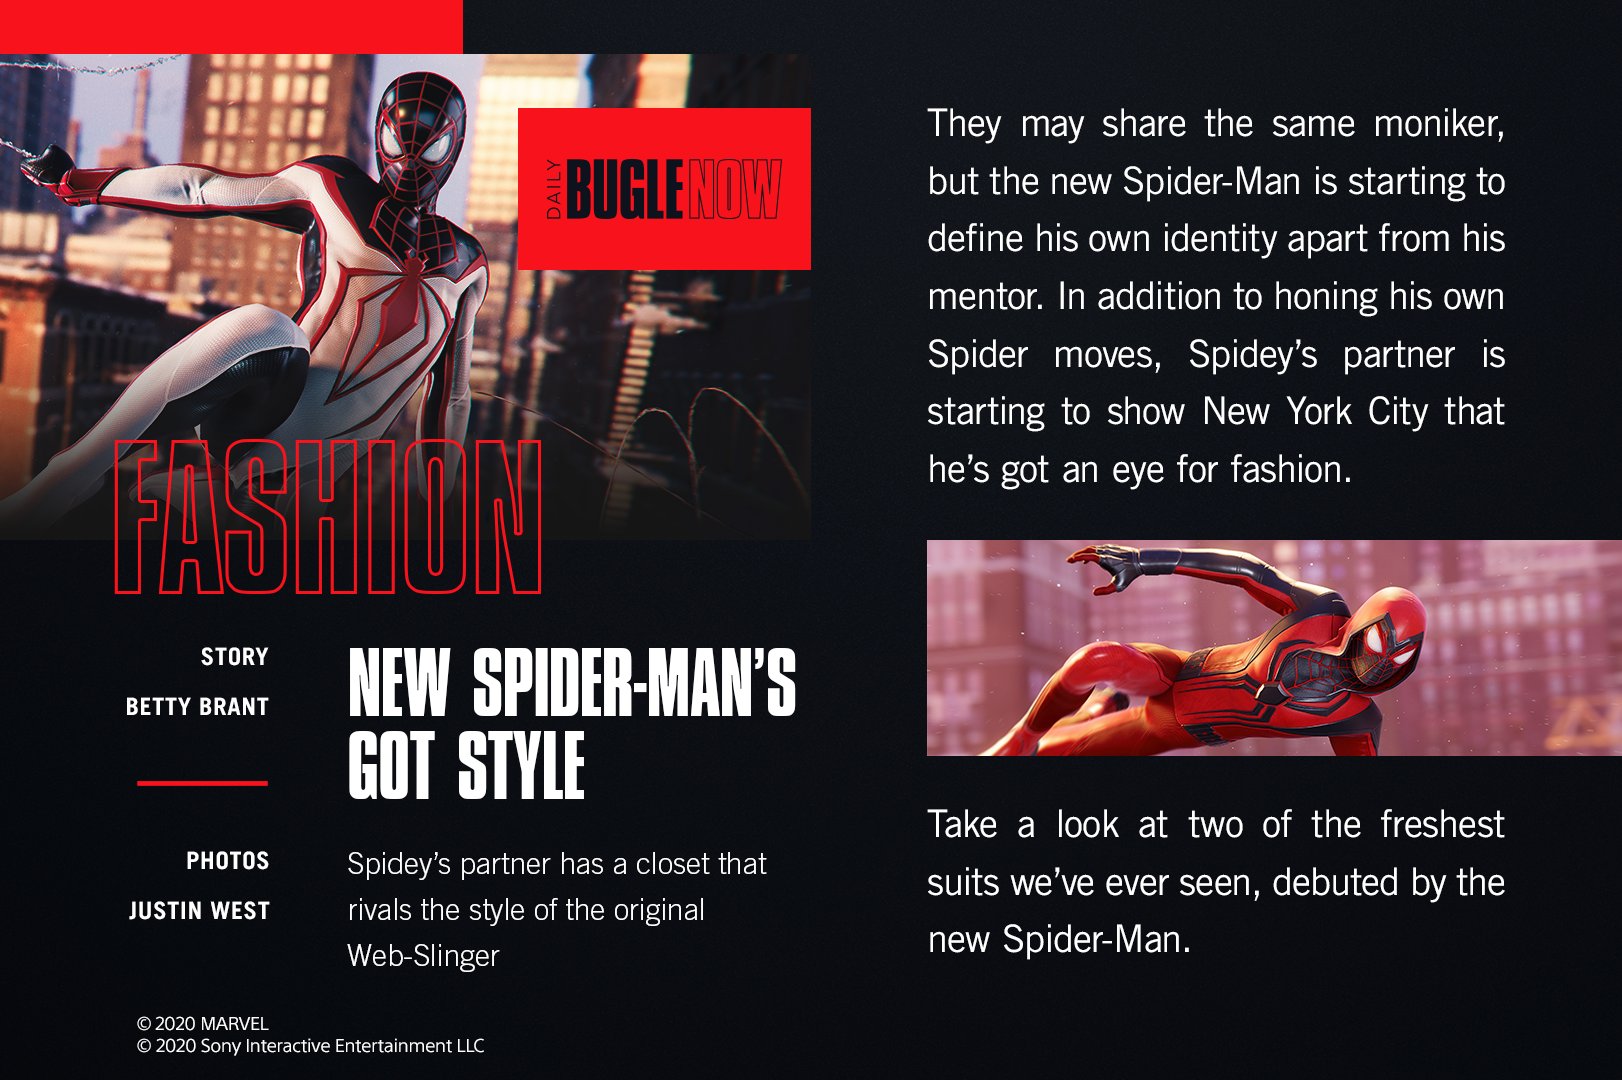 Insomniac Games On Twitter Wondering About This New Spider Man And His Suits Daily Bugle Now Has You Covered With This Latest Story Milesmoralesps5 Begreater Beyourself Https T Co Qf1bqa13sz